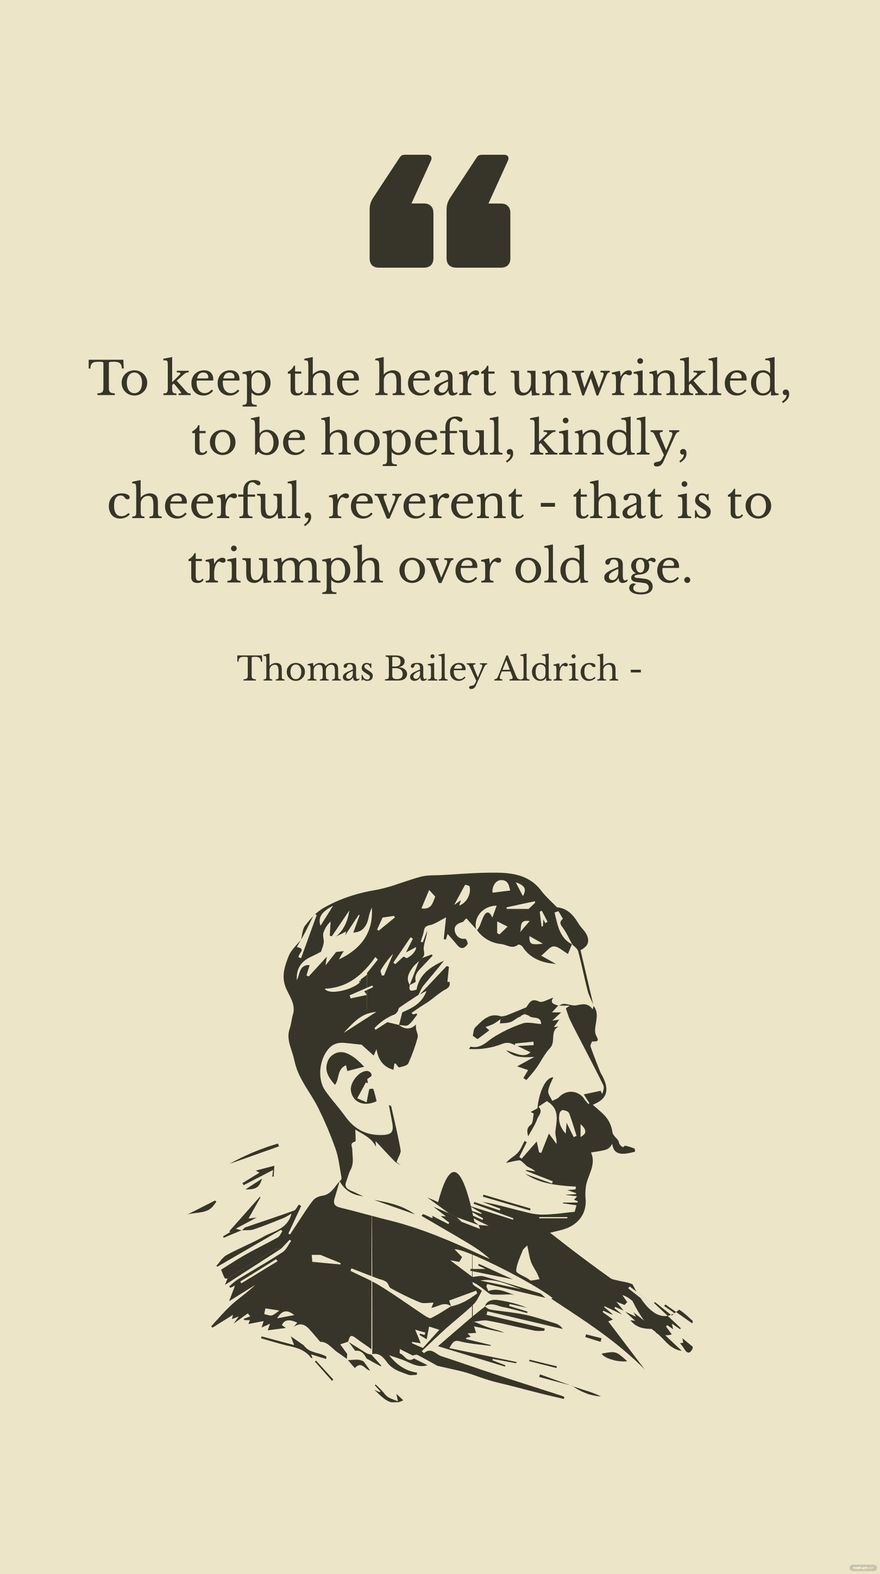 Thomas Bailey Aldrich - To keep the heart unwrinkled, to be hopeful, kindly, cheerful, reverent - that is to triumph over old age.